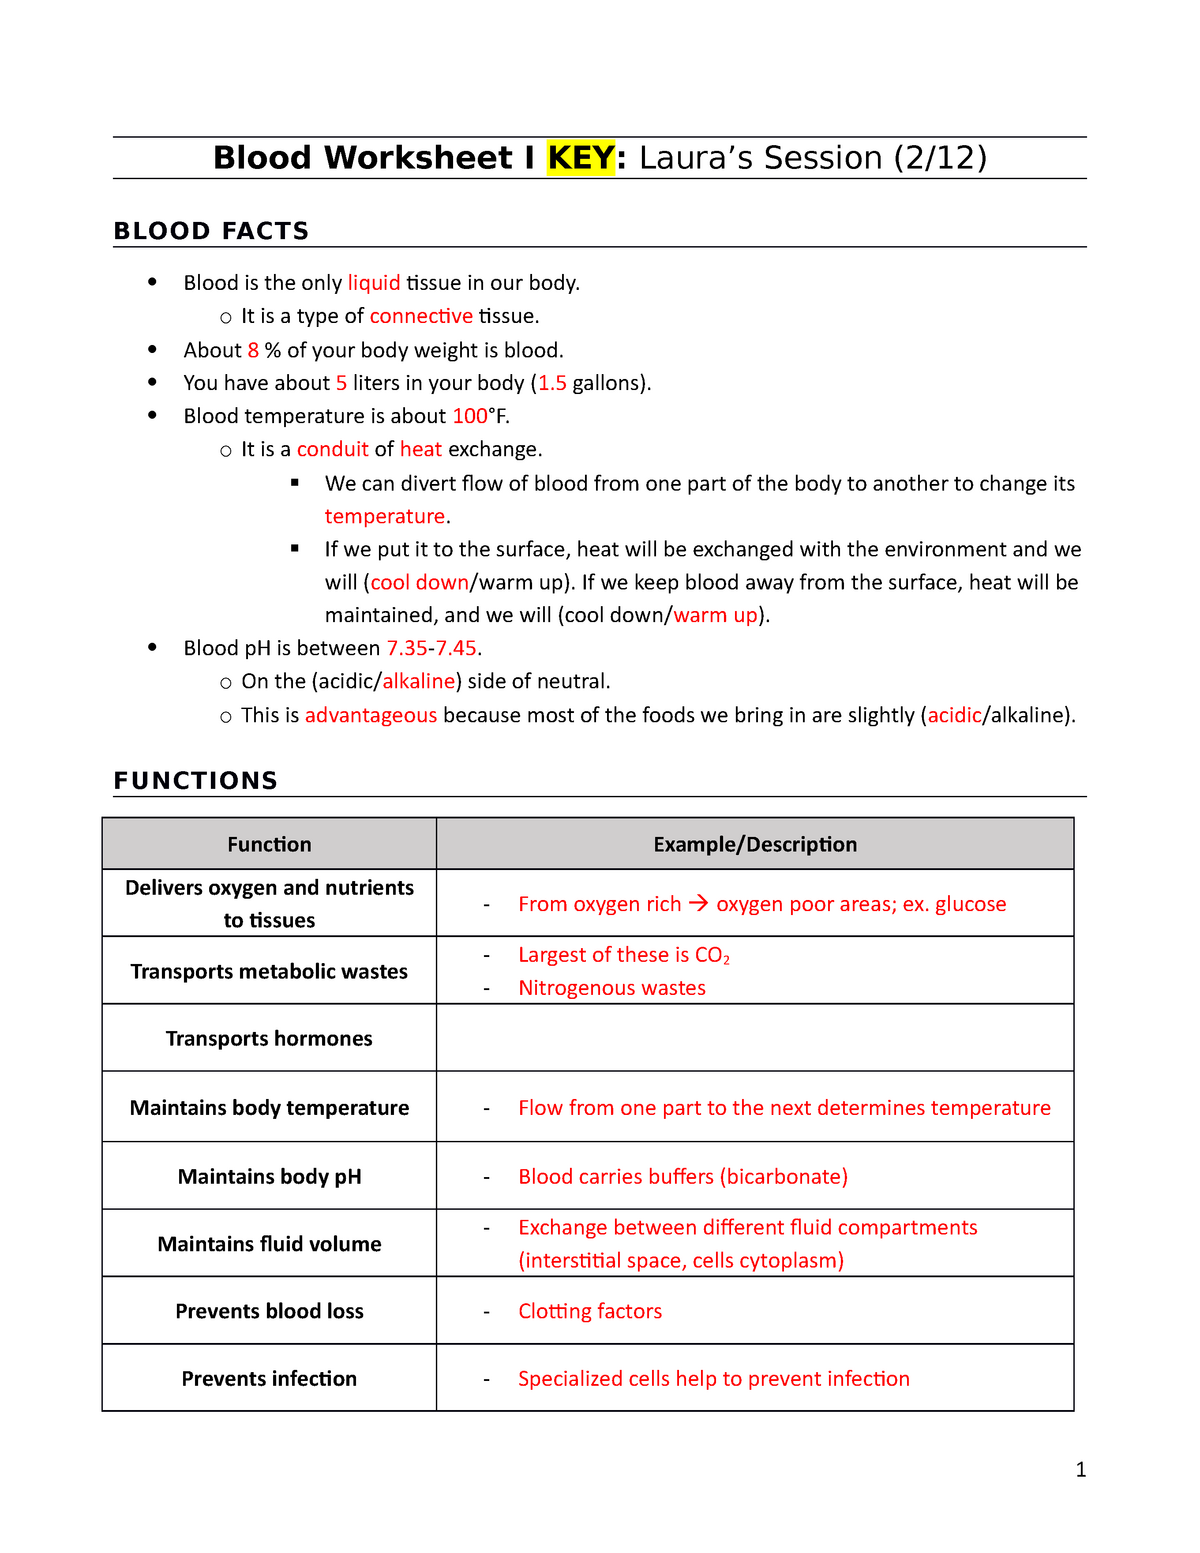 pal-blood-worksheet-i-key-blood-worksheet-i-key-laura-s-session-2-12-blood-facts-blood-is